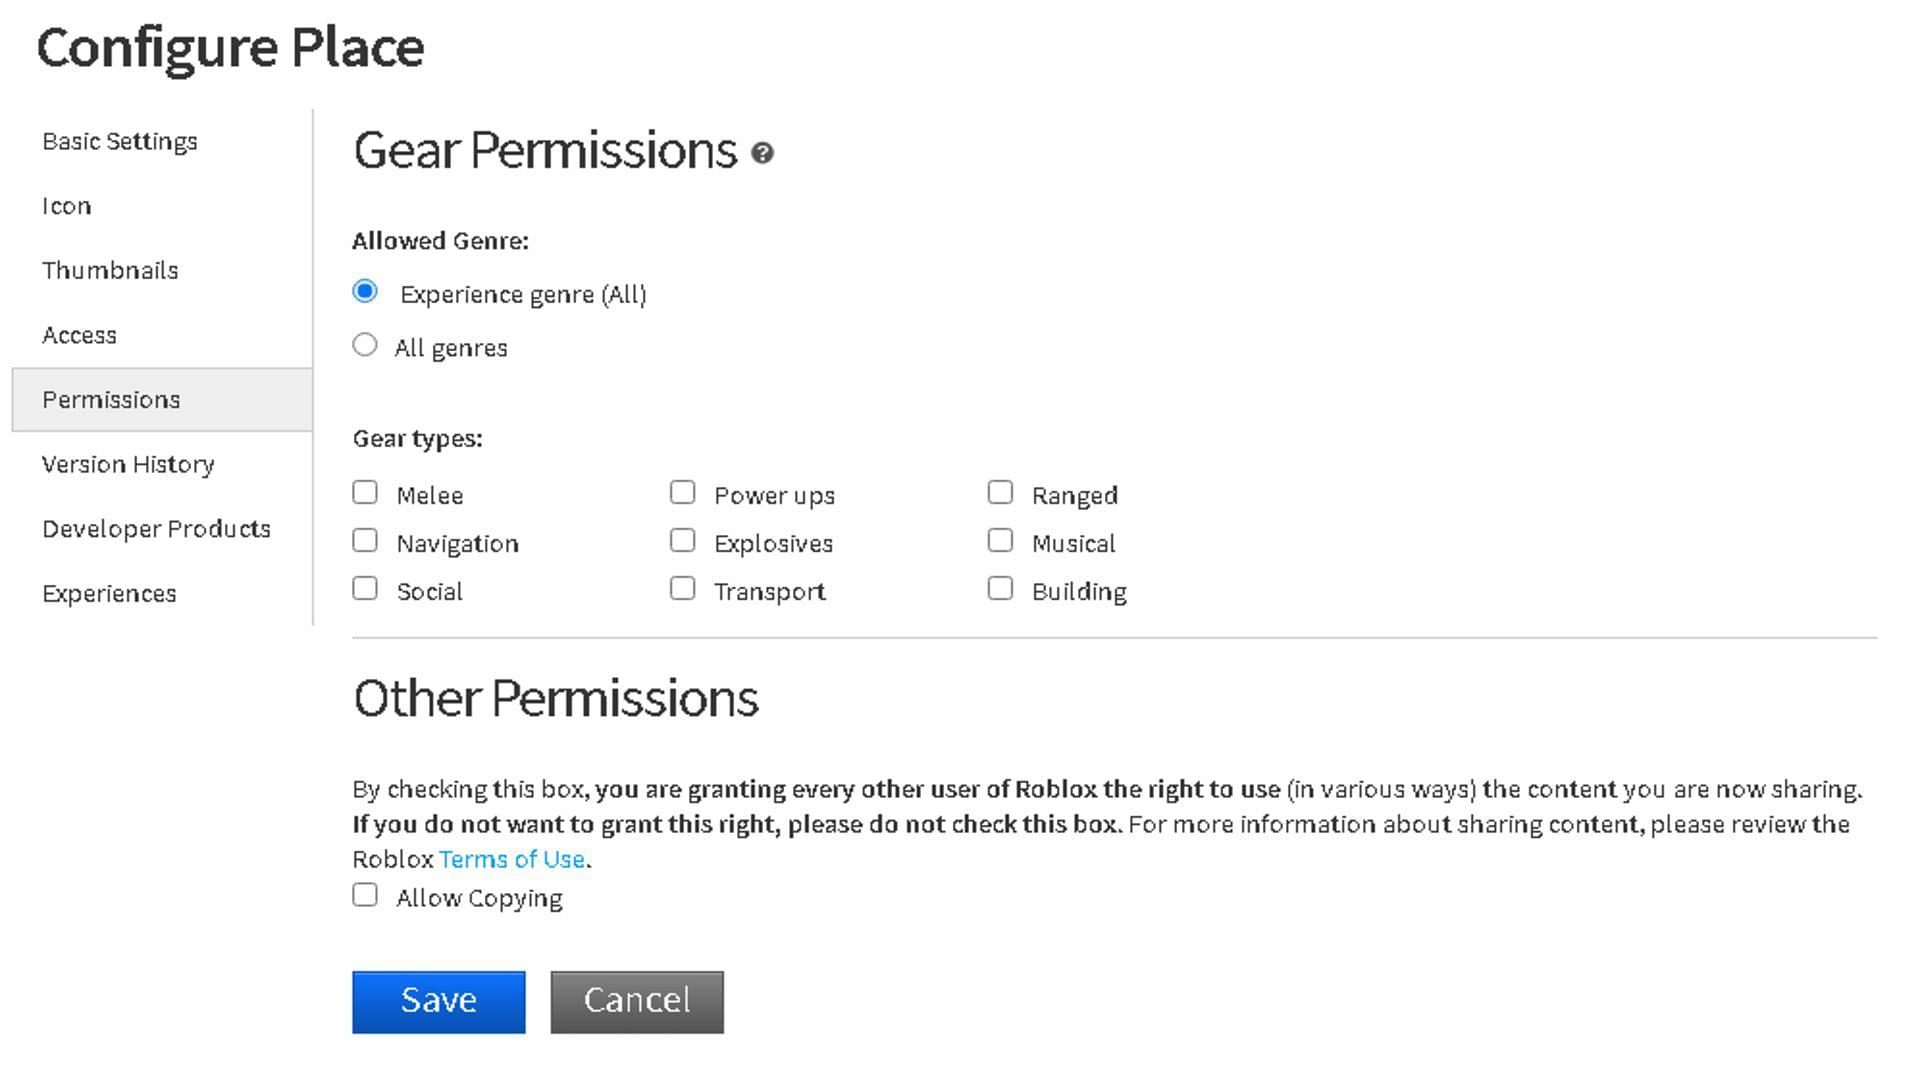 Players have to alter their permissions (Image via Roblox)